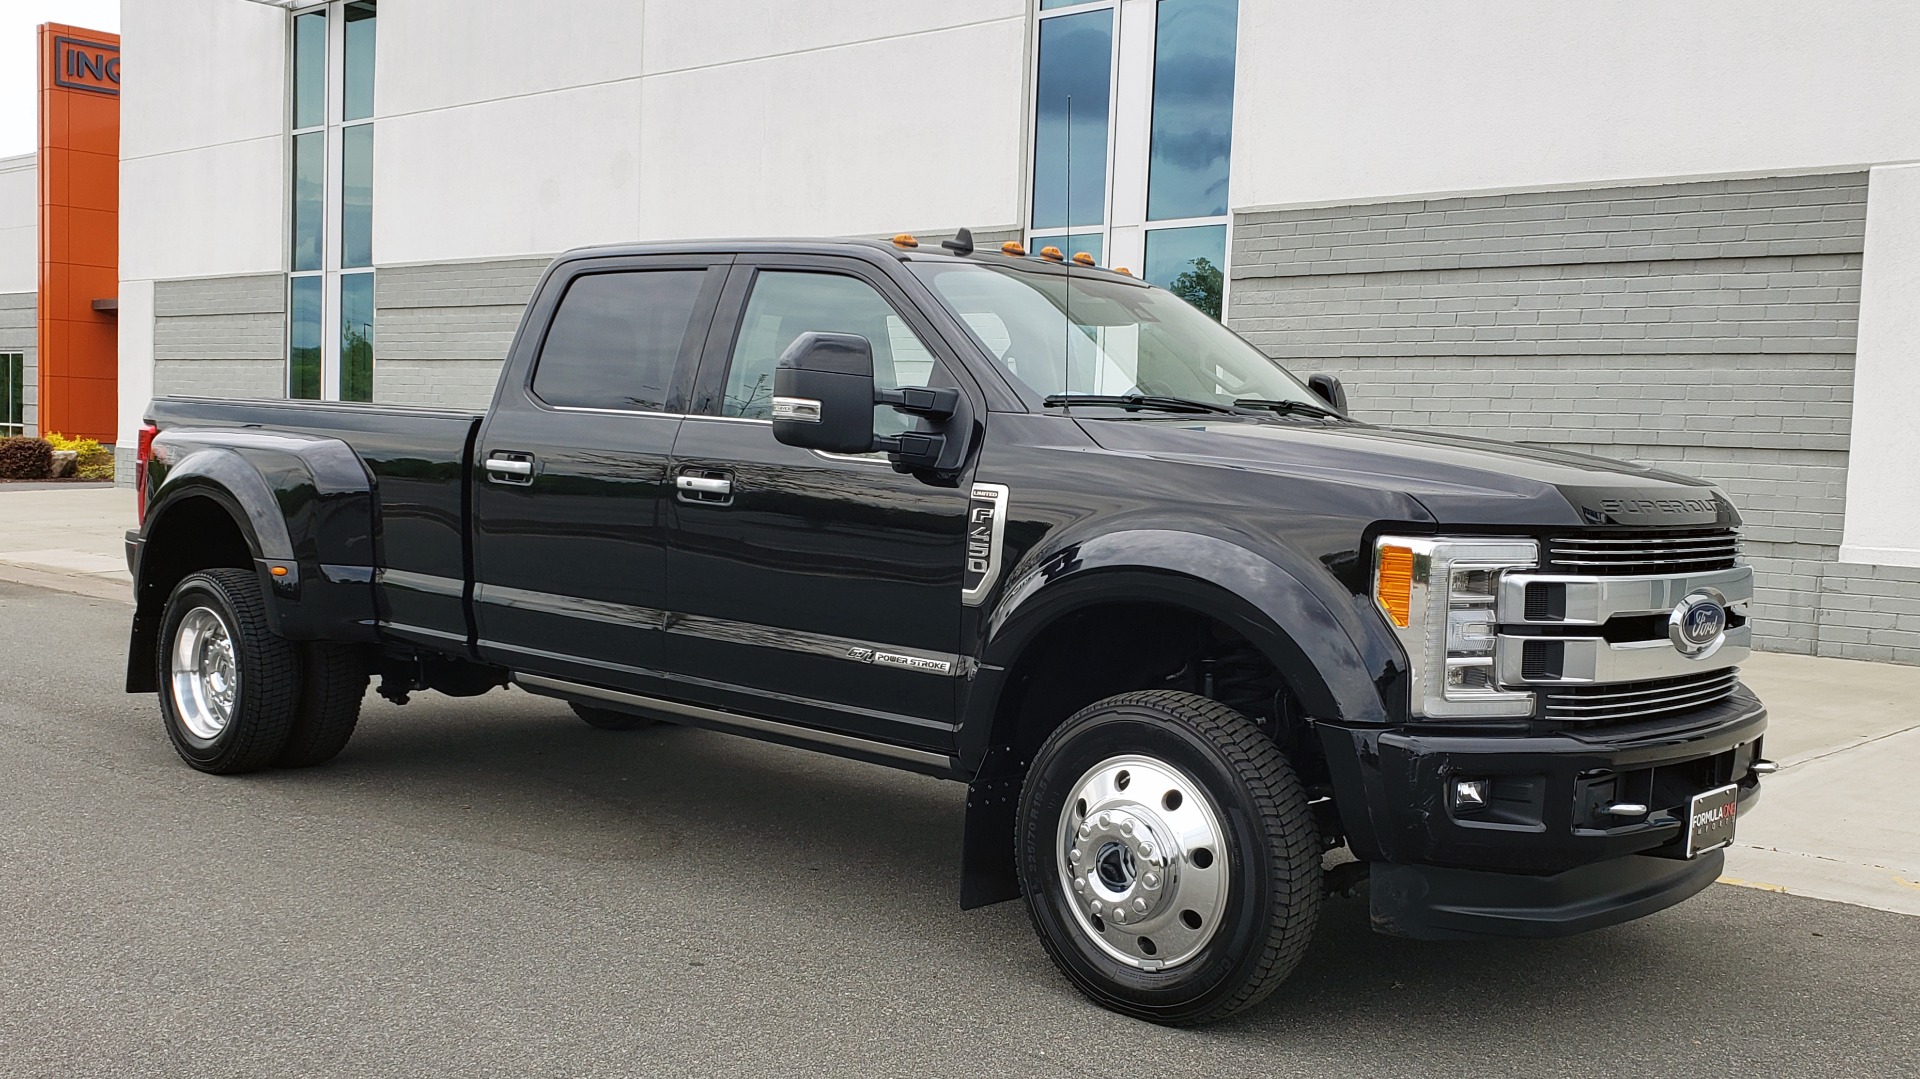 Used 2019 Ford SUPER DUTY F-450 DRW LIMITED / 4X4 / CREWCAB 176IN WB / LOADED / LOW MILES for sale Sold at Formula Imports in Charlotte NC 28227 5